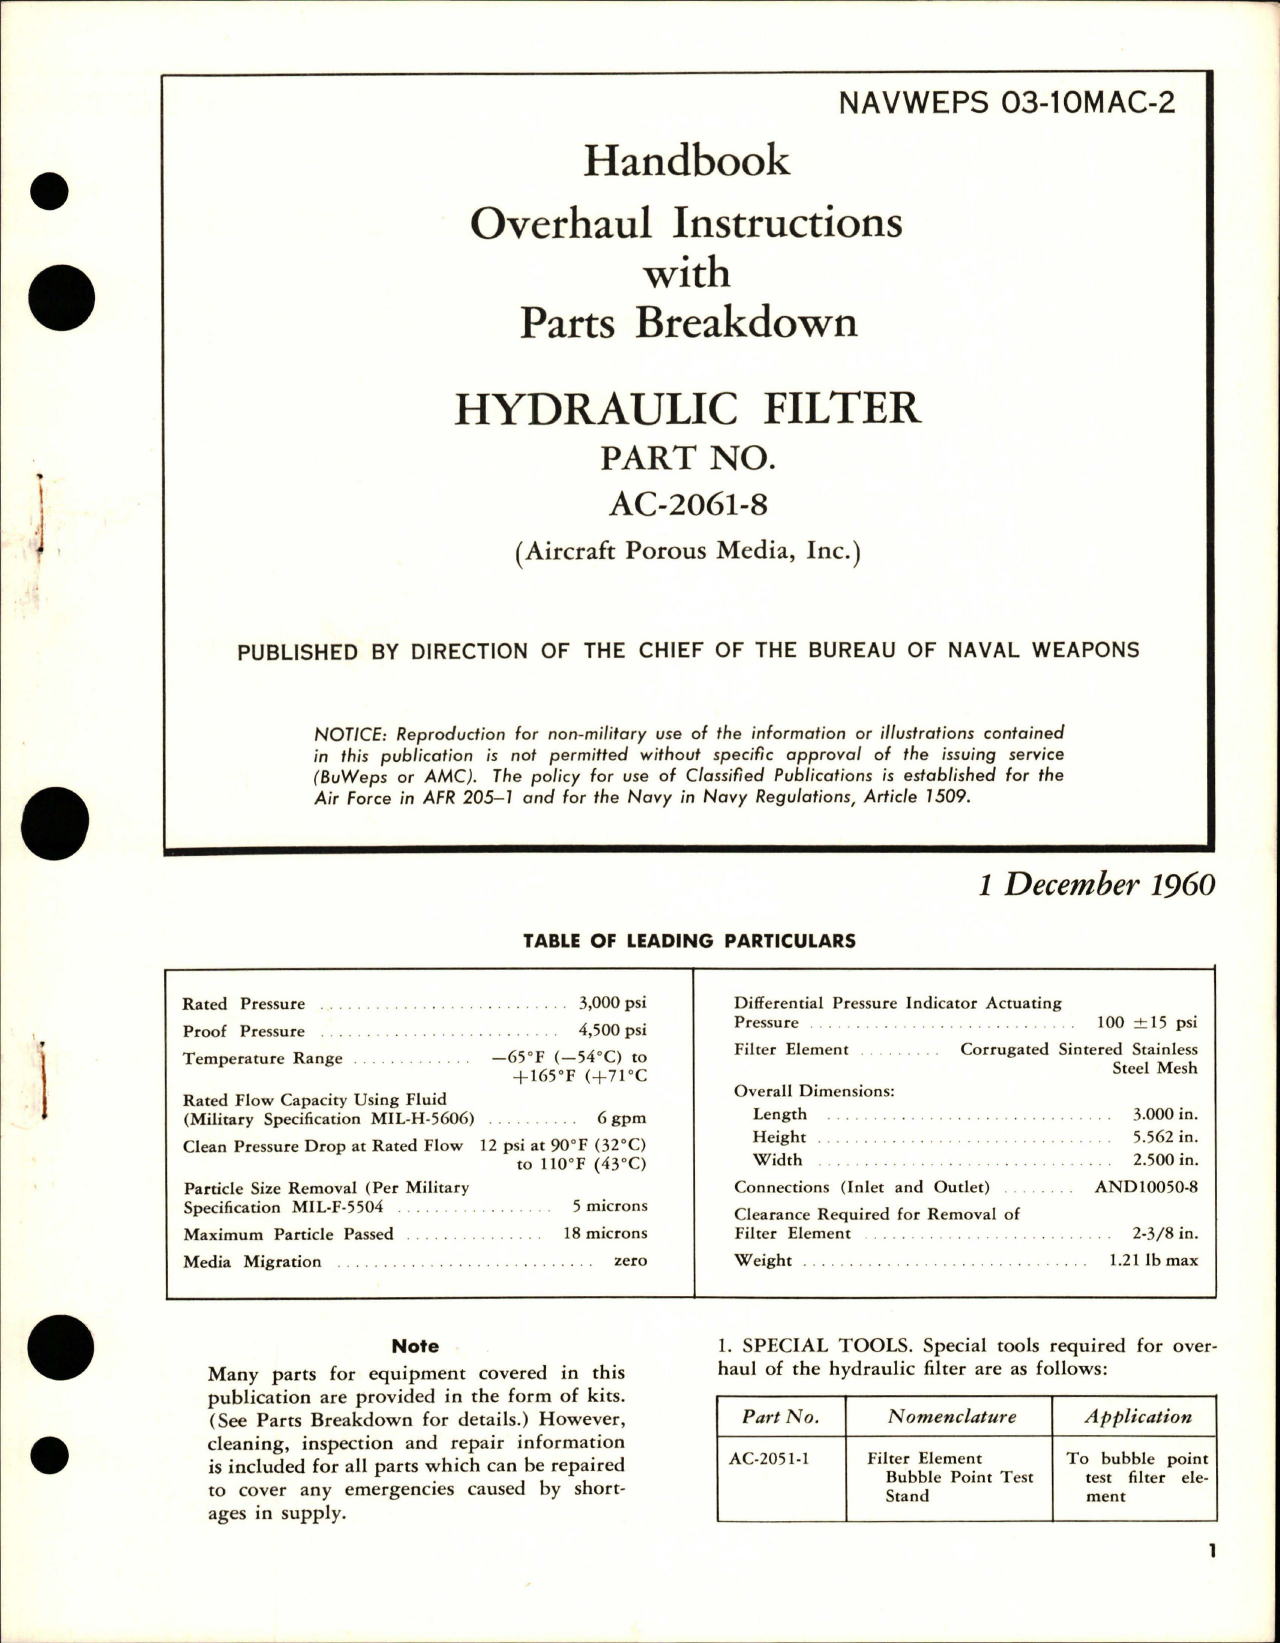 Sample page 1 from AirCorps Library document: Overhaul Instructions with Parts Breakdown for Hydraulic Filter - Part AC-2061-8 